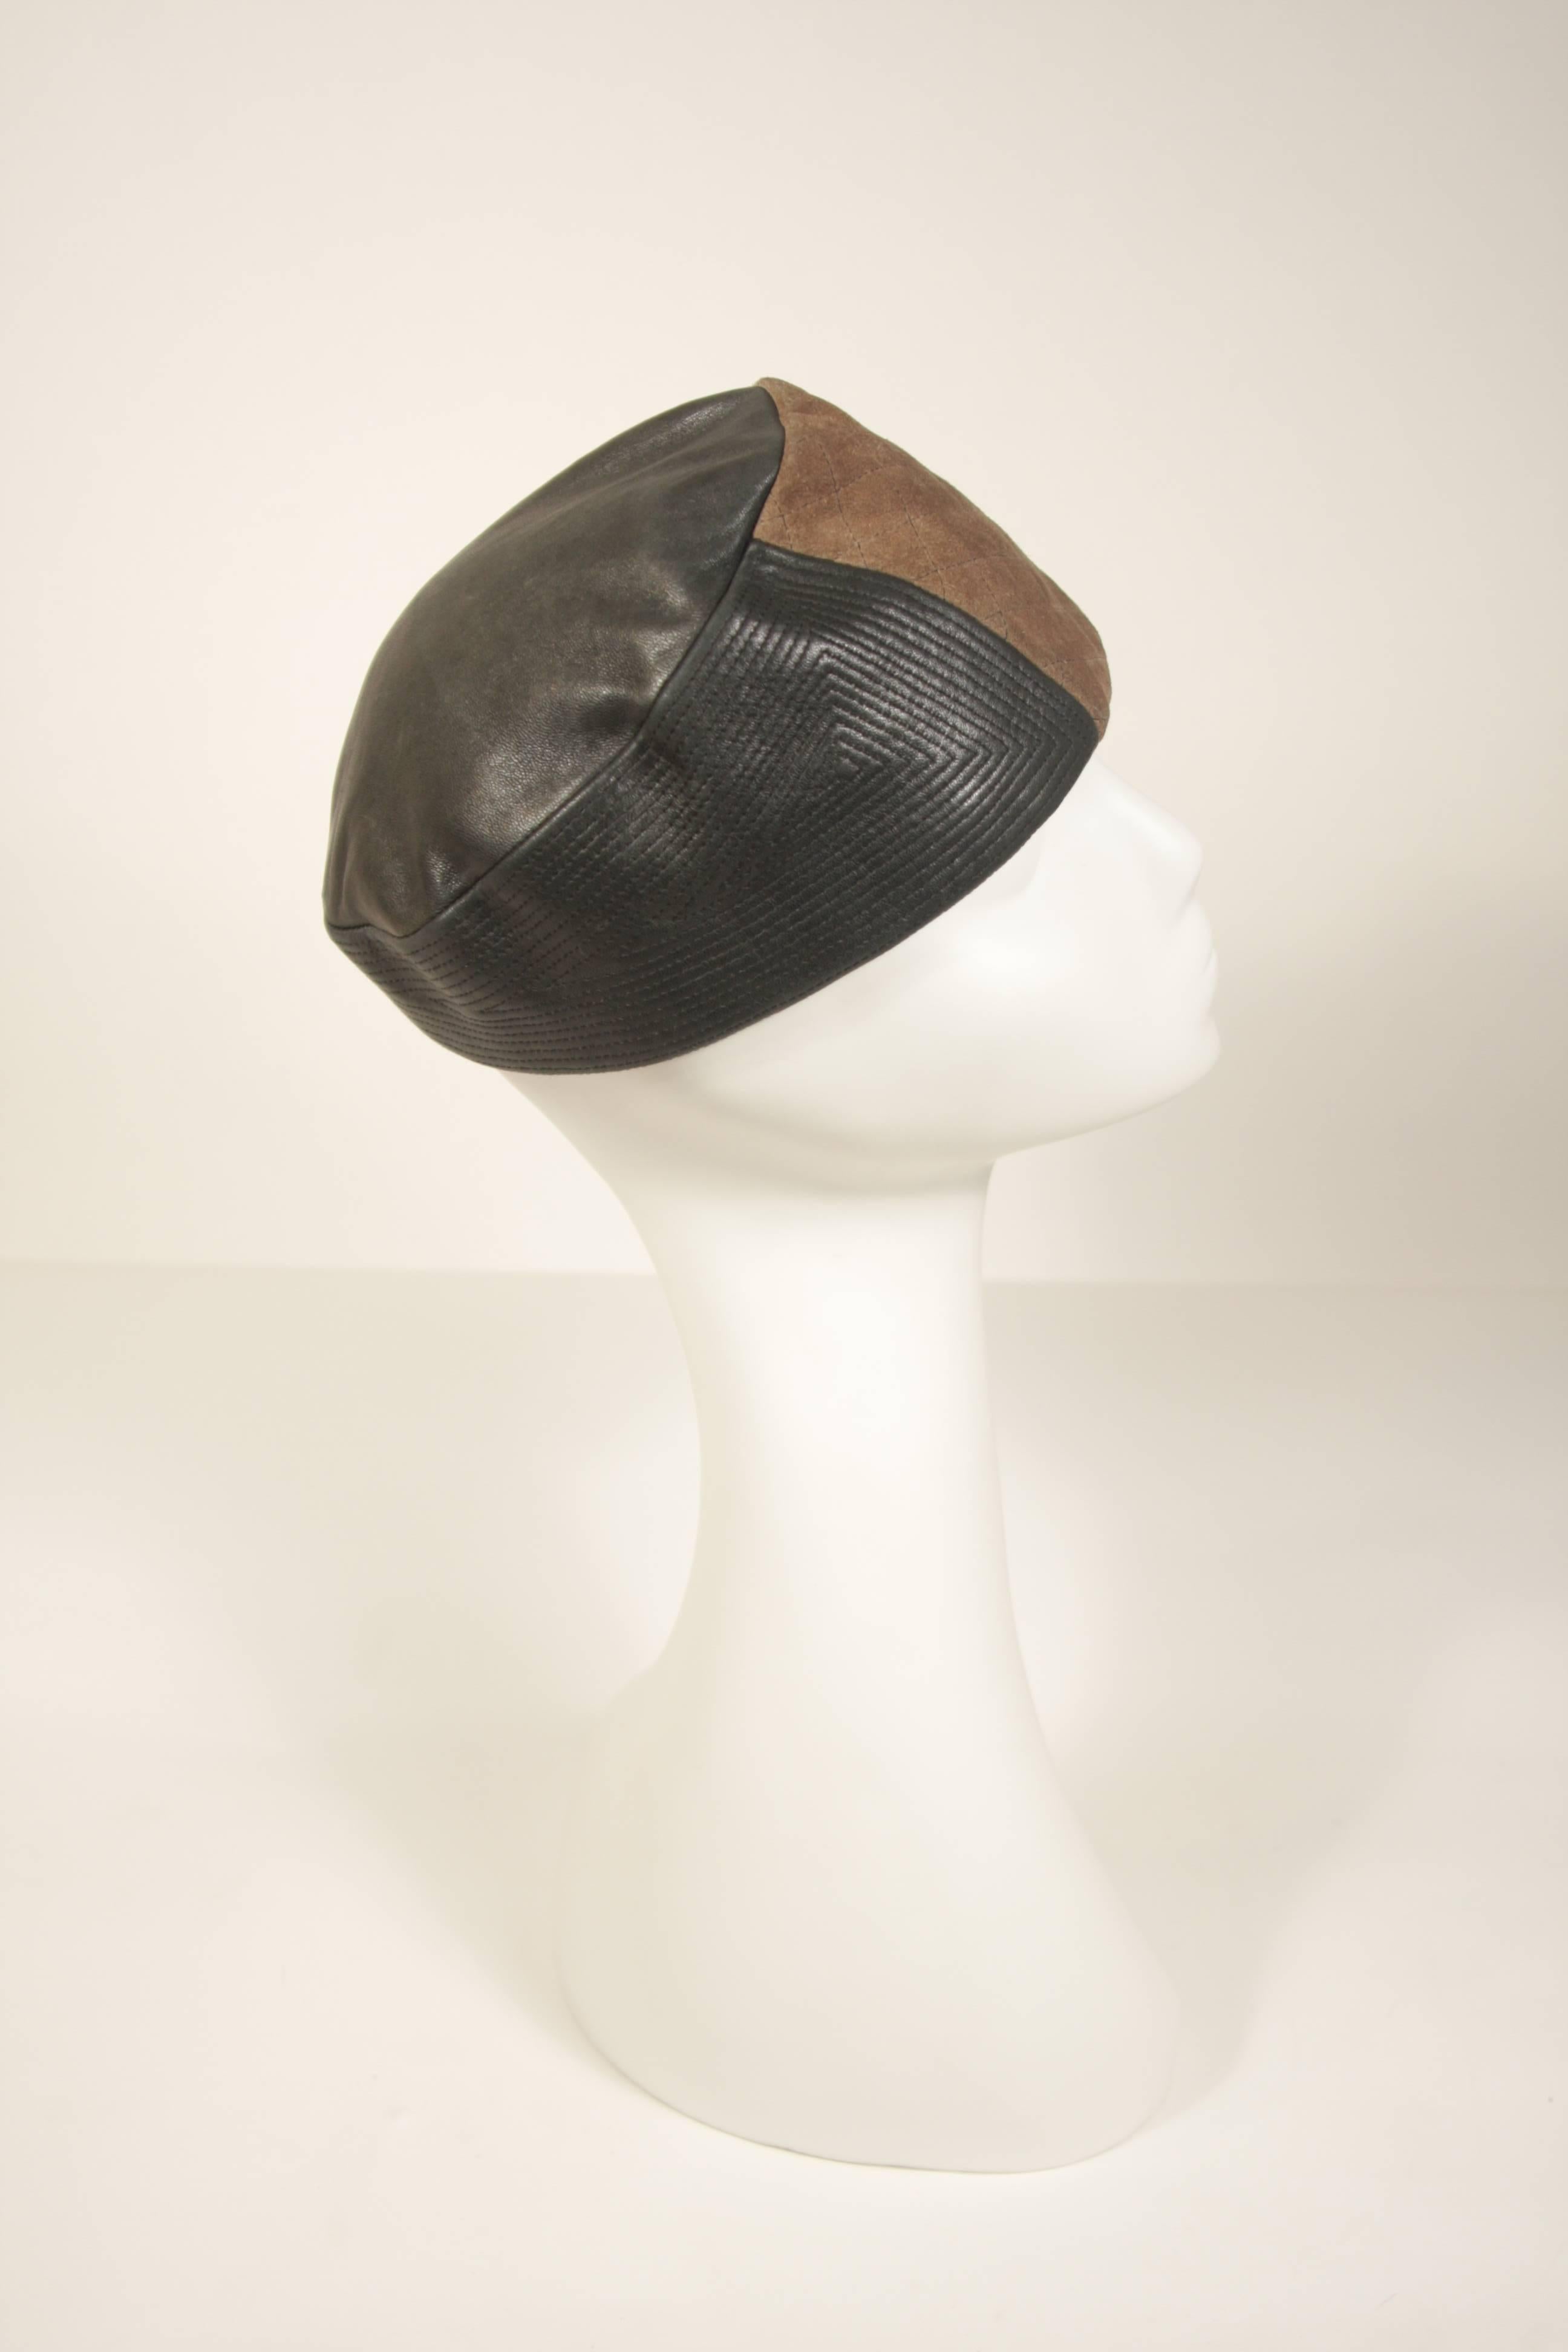 Gray YVES SAINT LAURENT RIVE GAUCHE Suede and Leather Hat with Top Stitch Details For Sale